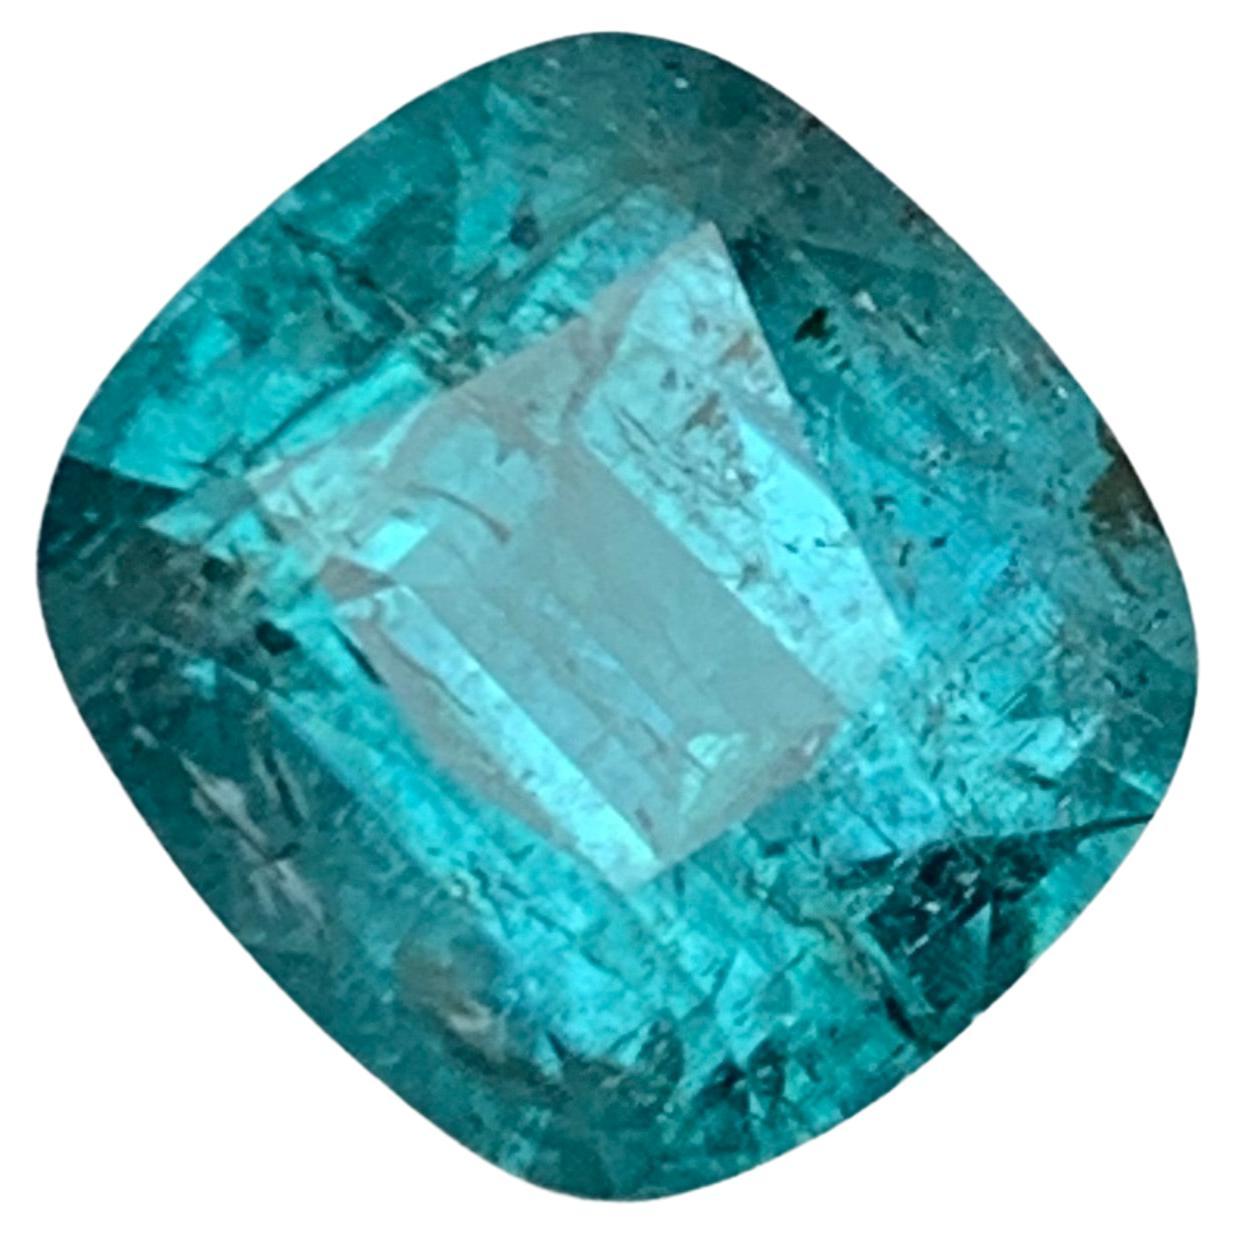 Rare Blue Natural Tourmaline Gemstone, 6.25 Ct Cushion Cut for Ring/Jewelry  For Sale